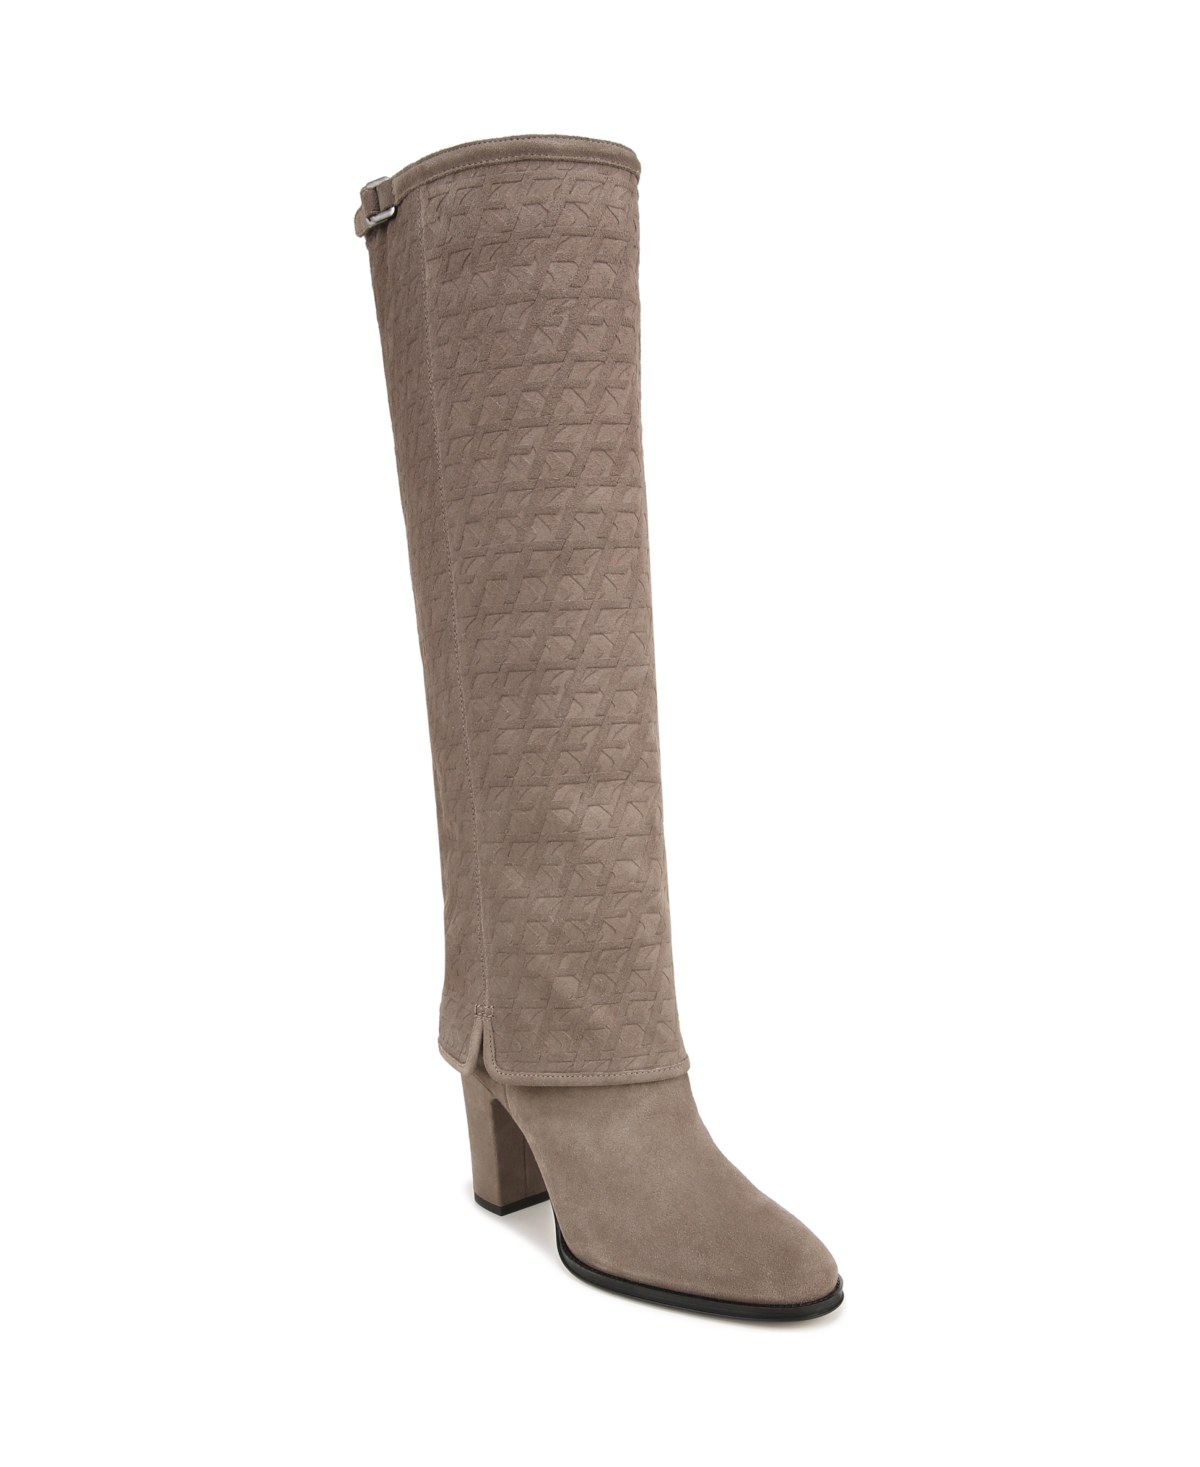 FRANCO SARTO INFORMA WEST KNEE HIGH FOLD-OVER CUFFED BOOTS